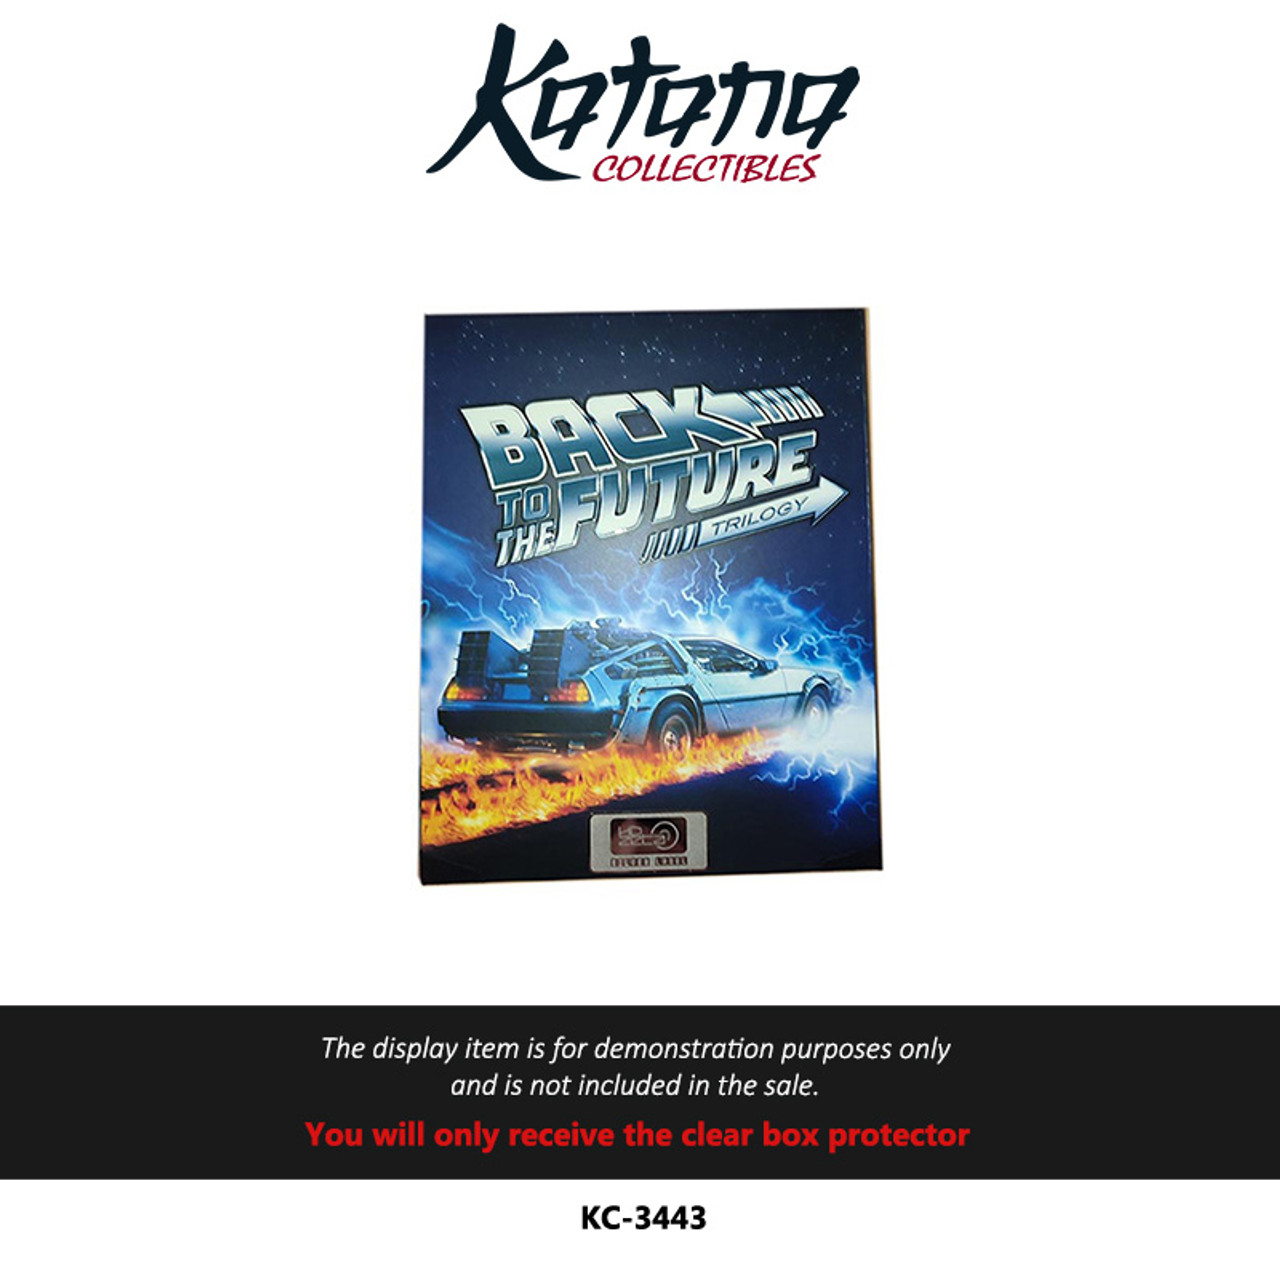 Katana Collectibles Protector For Back To The Future Trilogy boxset